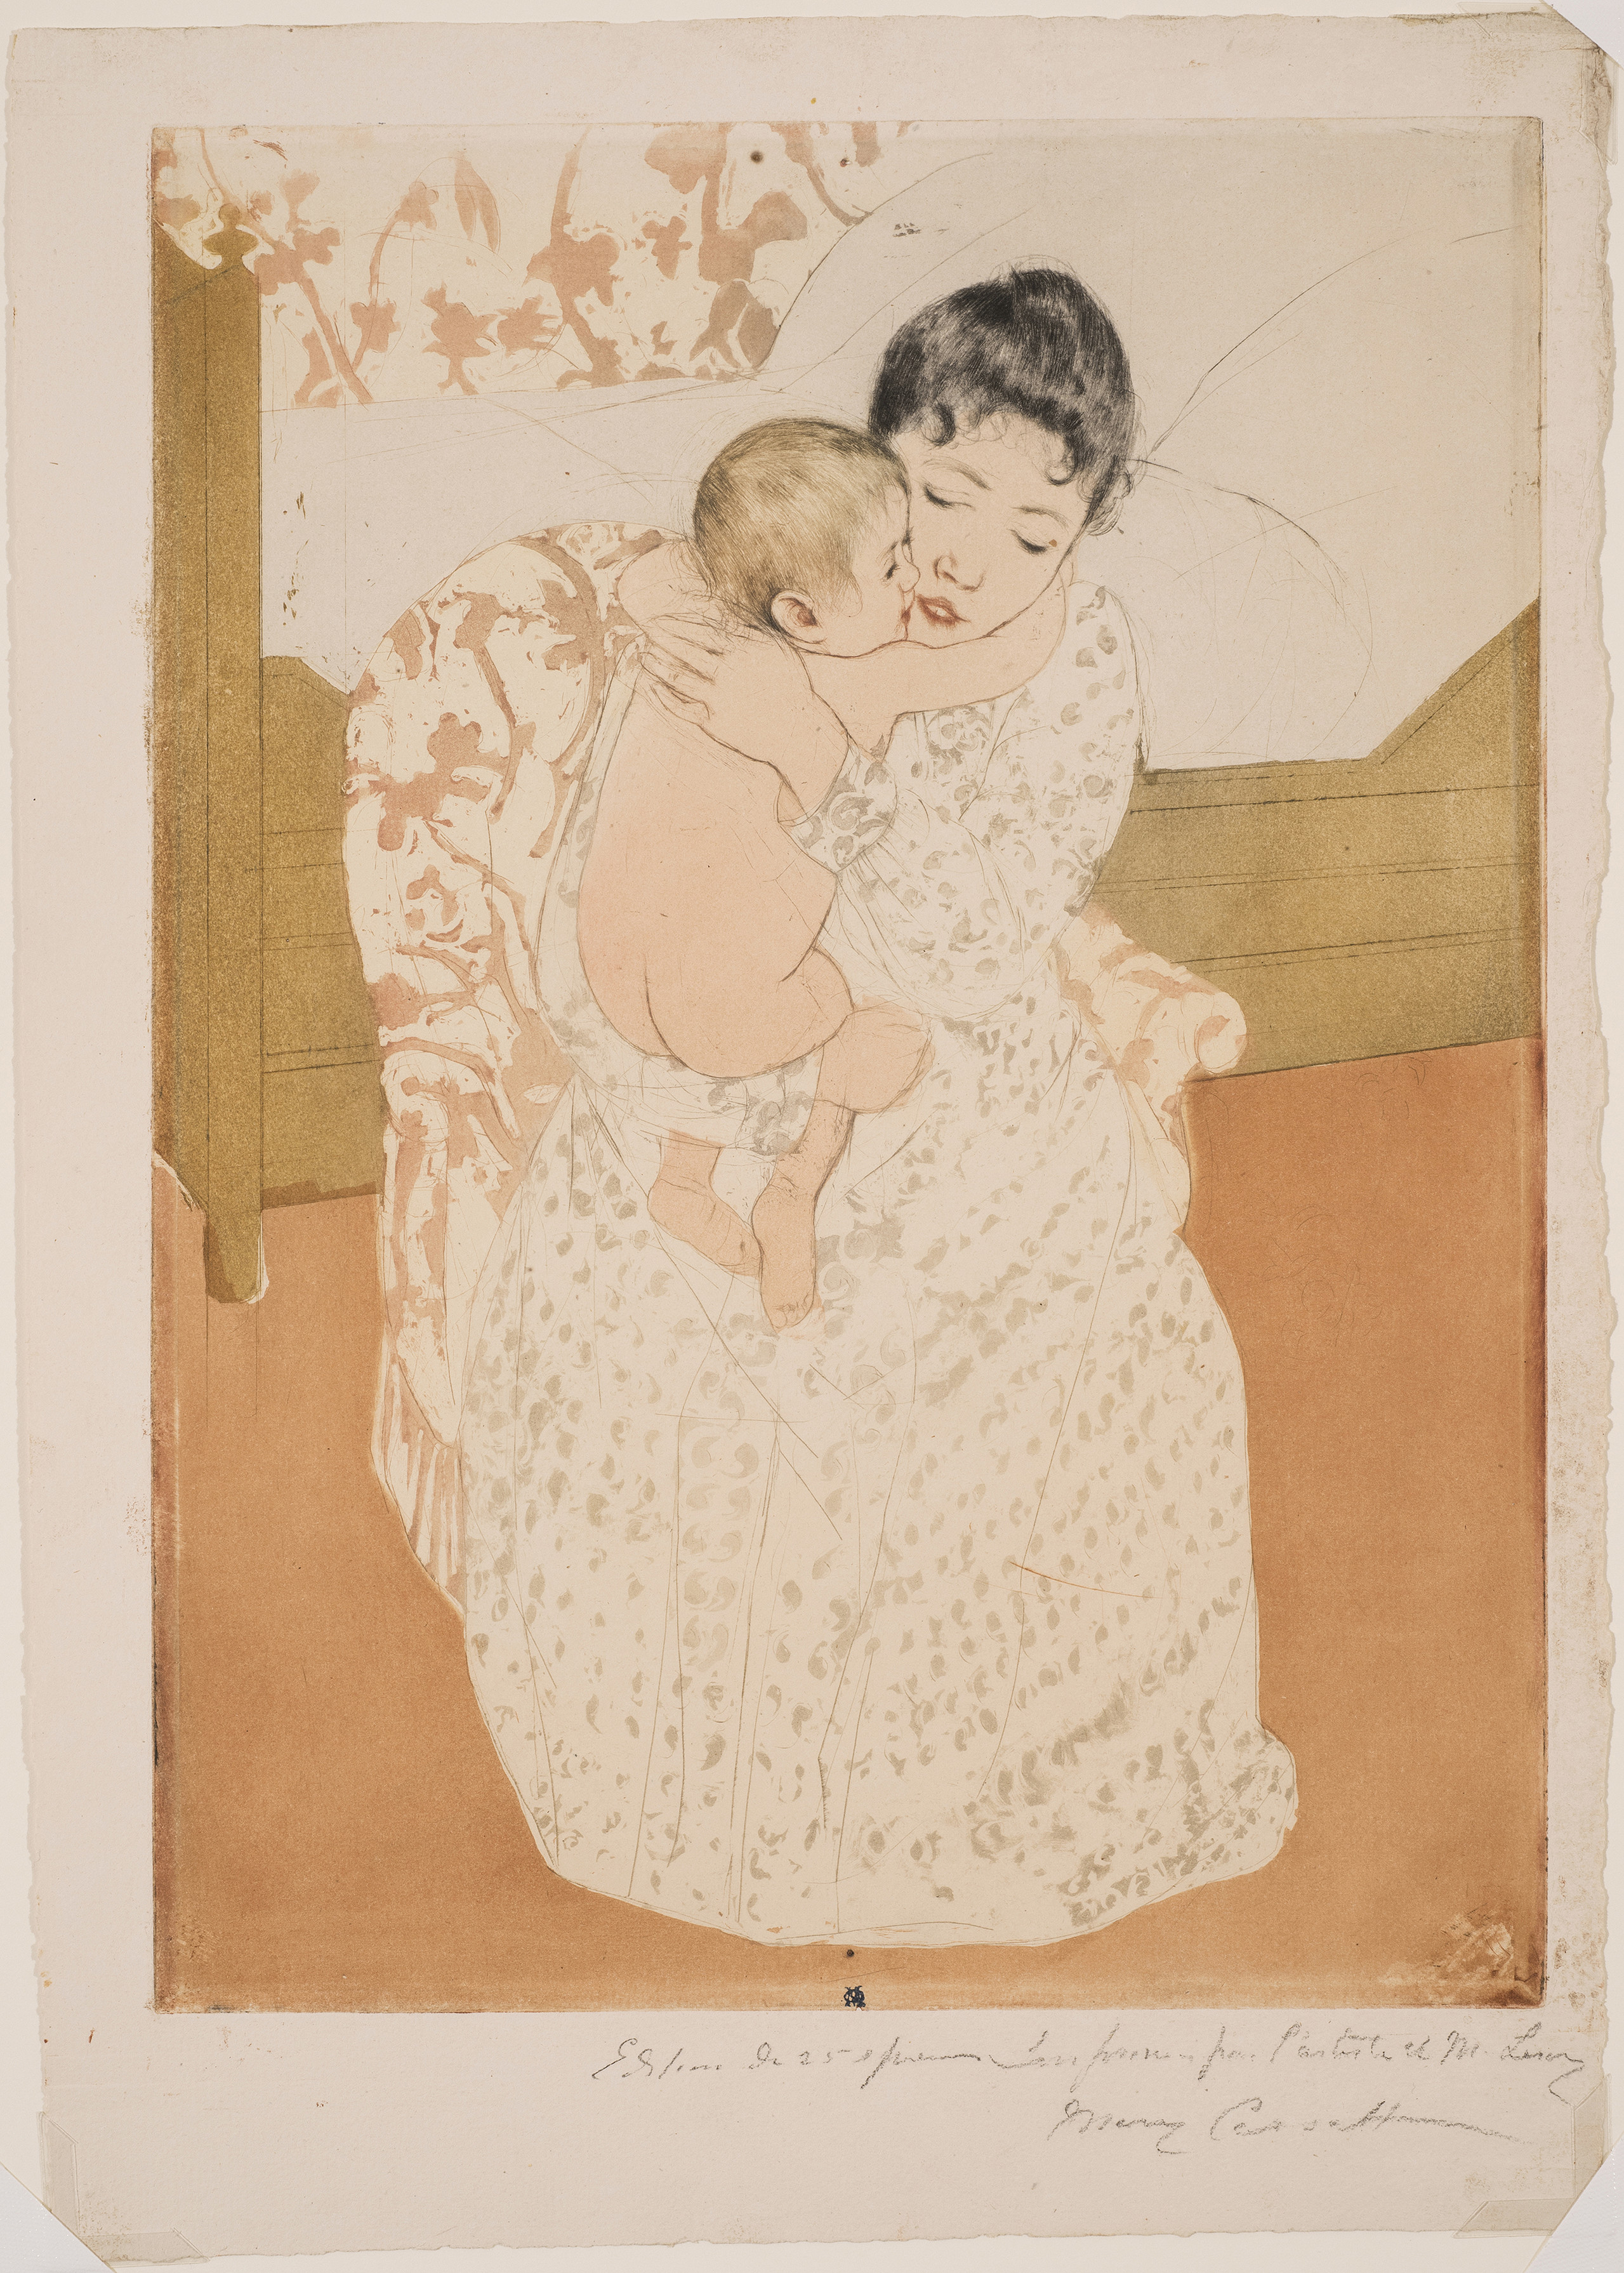 A print shows a dark-haired, light-skinned woman sitting in a chair before a simple bed and closely embracing a naked infant. The baby’s arm encircles her neck, and their cheeks touch. The lack of shading and the pattern repeated on the back wall and chair flatten the space.